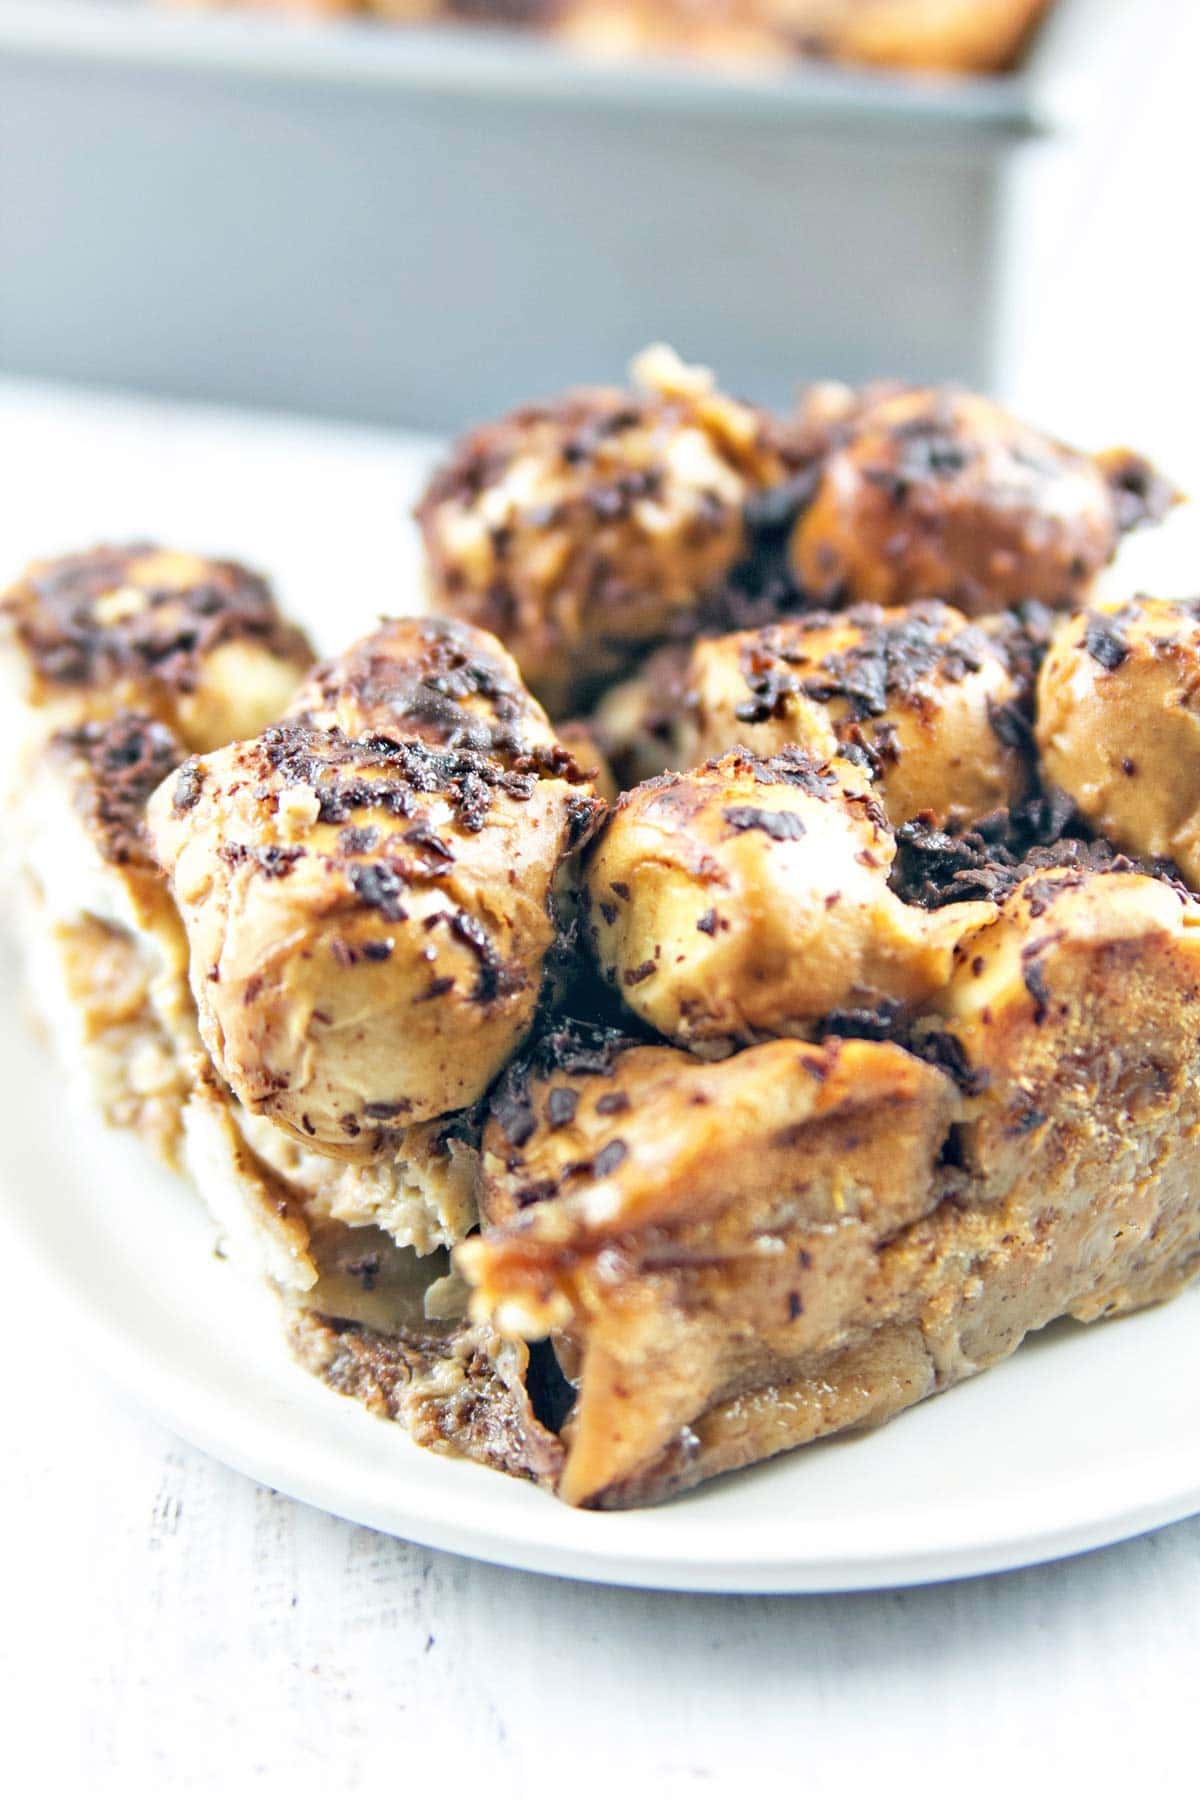 Chocolate Bourbon Soft Pretzel Bread Pudding: sweet and salty, crunchy and soft - an unexpected twist on a crowd-pleasing dessert. {Bunsen Burner Bakery}